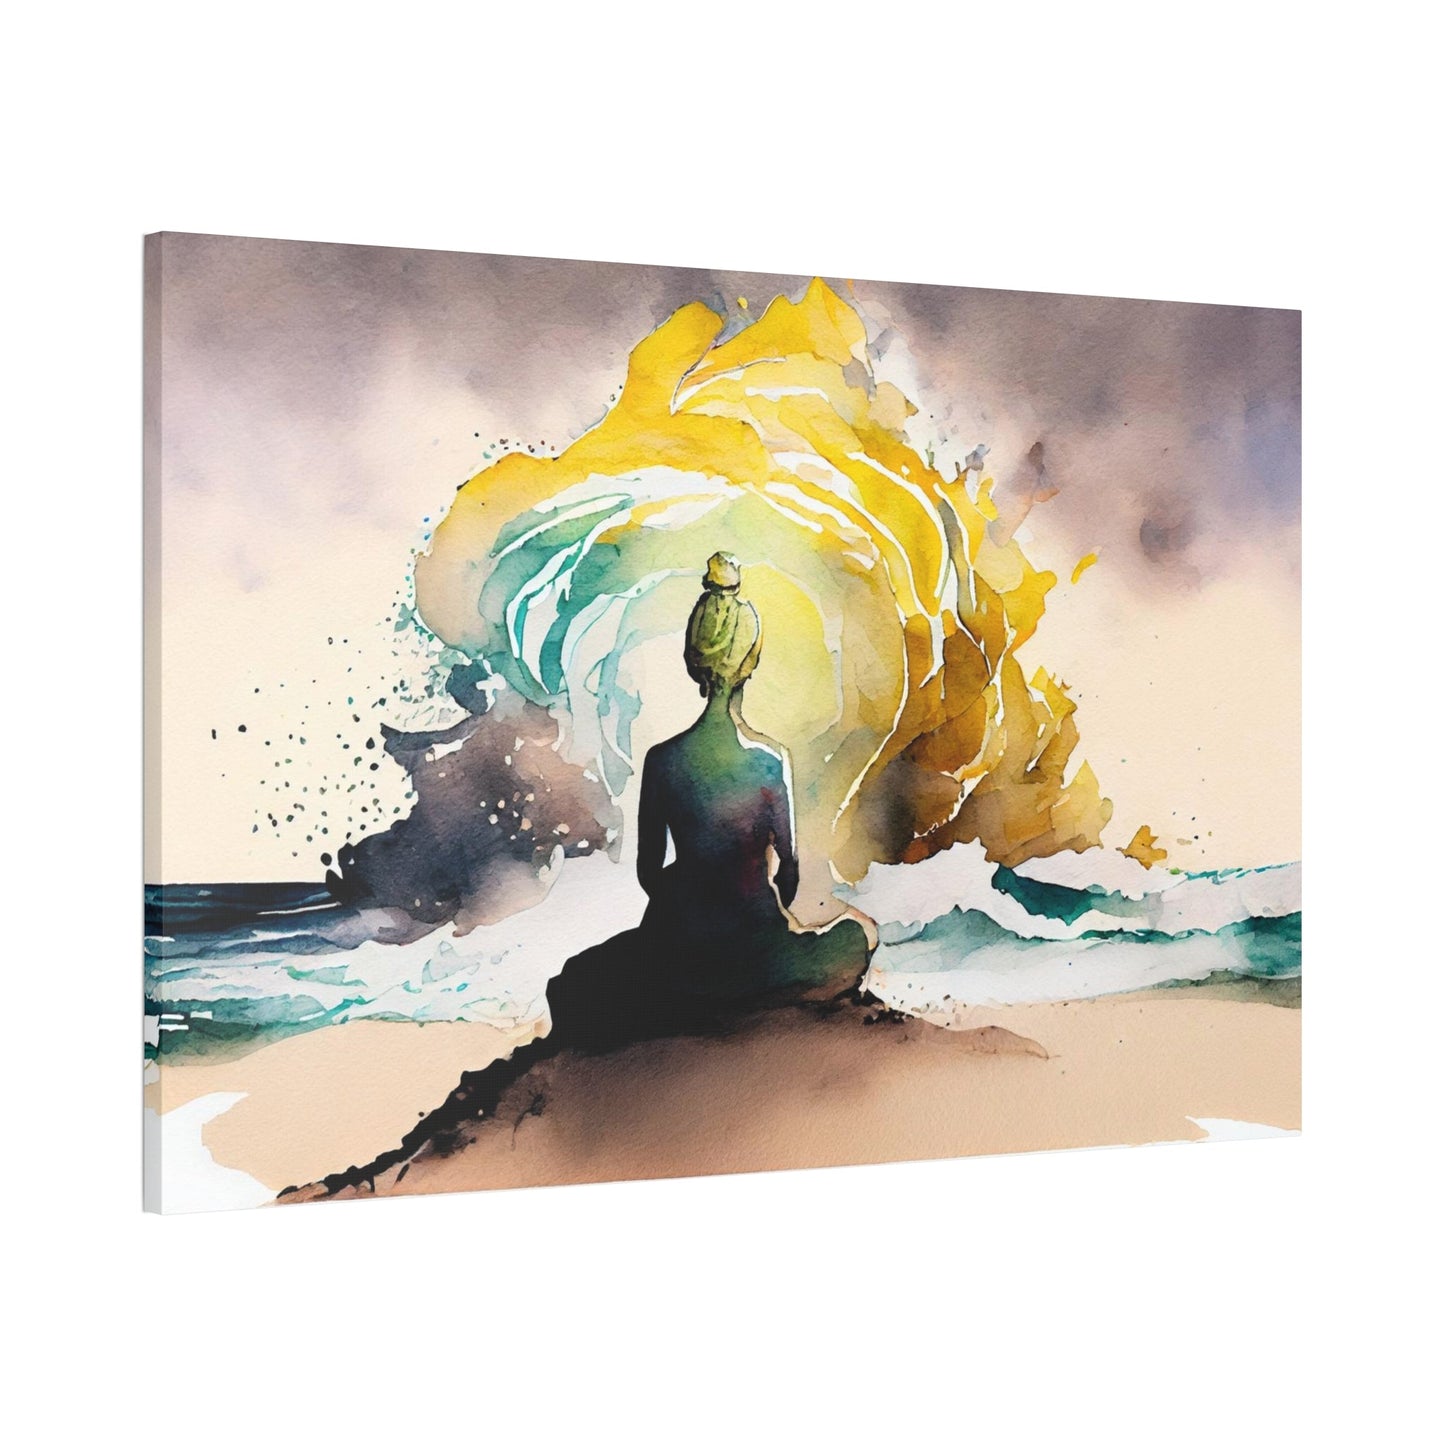 Clear Your Mind: Artistic Framed Canvas for a Relaxing Escape